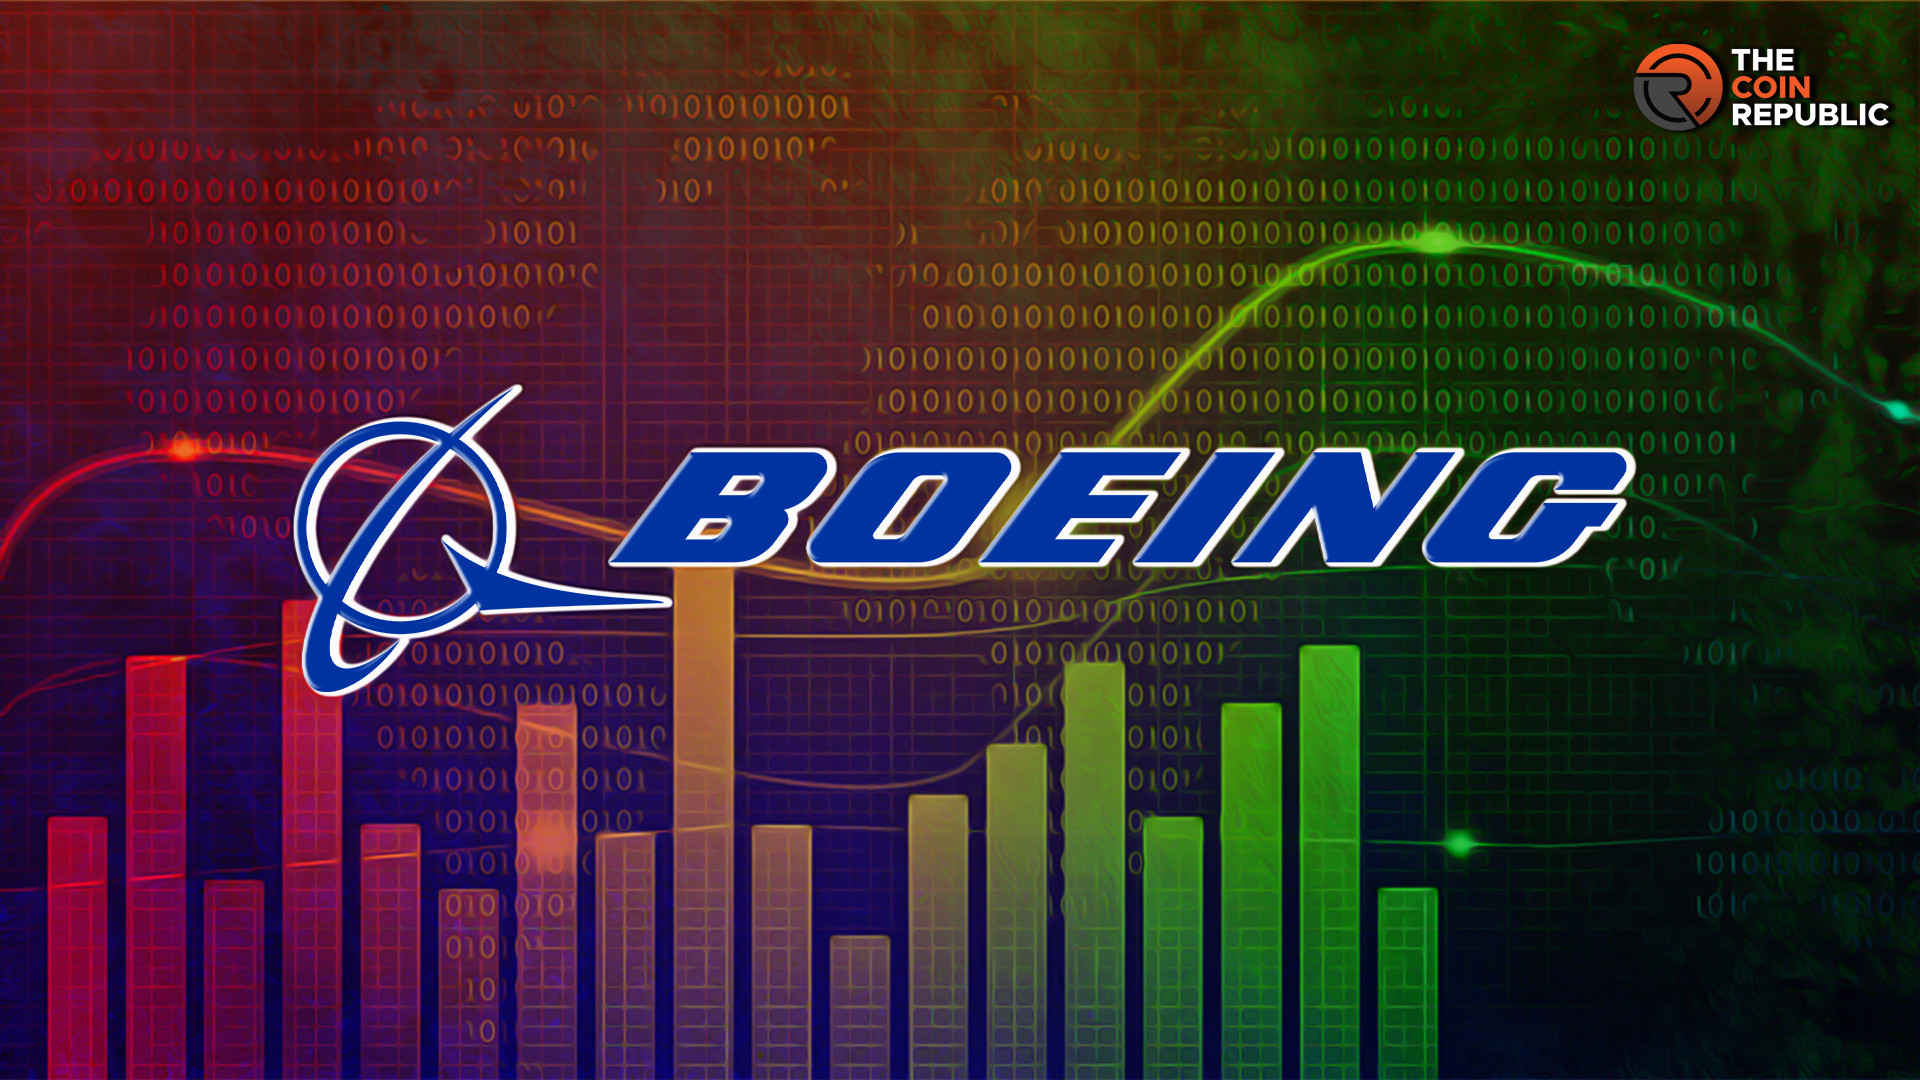 BA Stock: Will Boeing Stock Price Retest the Level of $120?